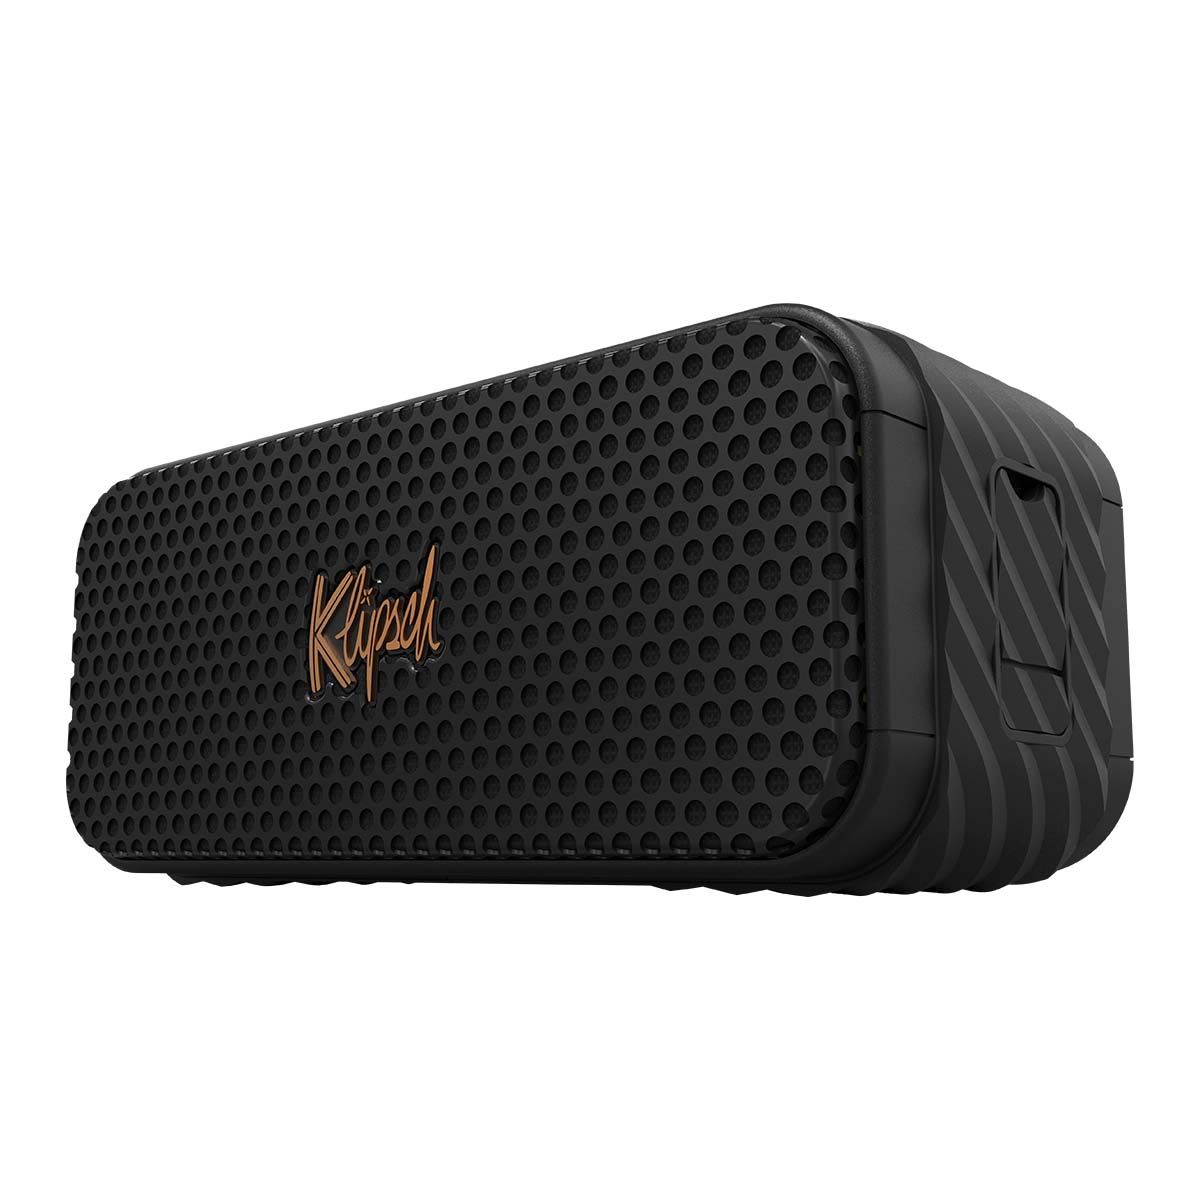 Klipsch Nashville Portable Bluetooth Speaker angled right front view